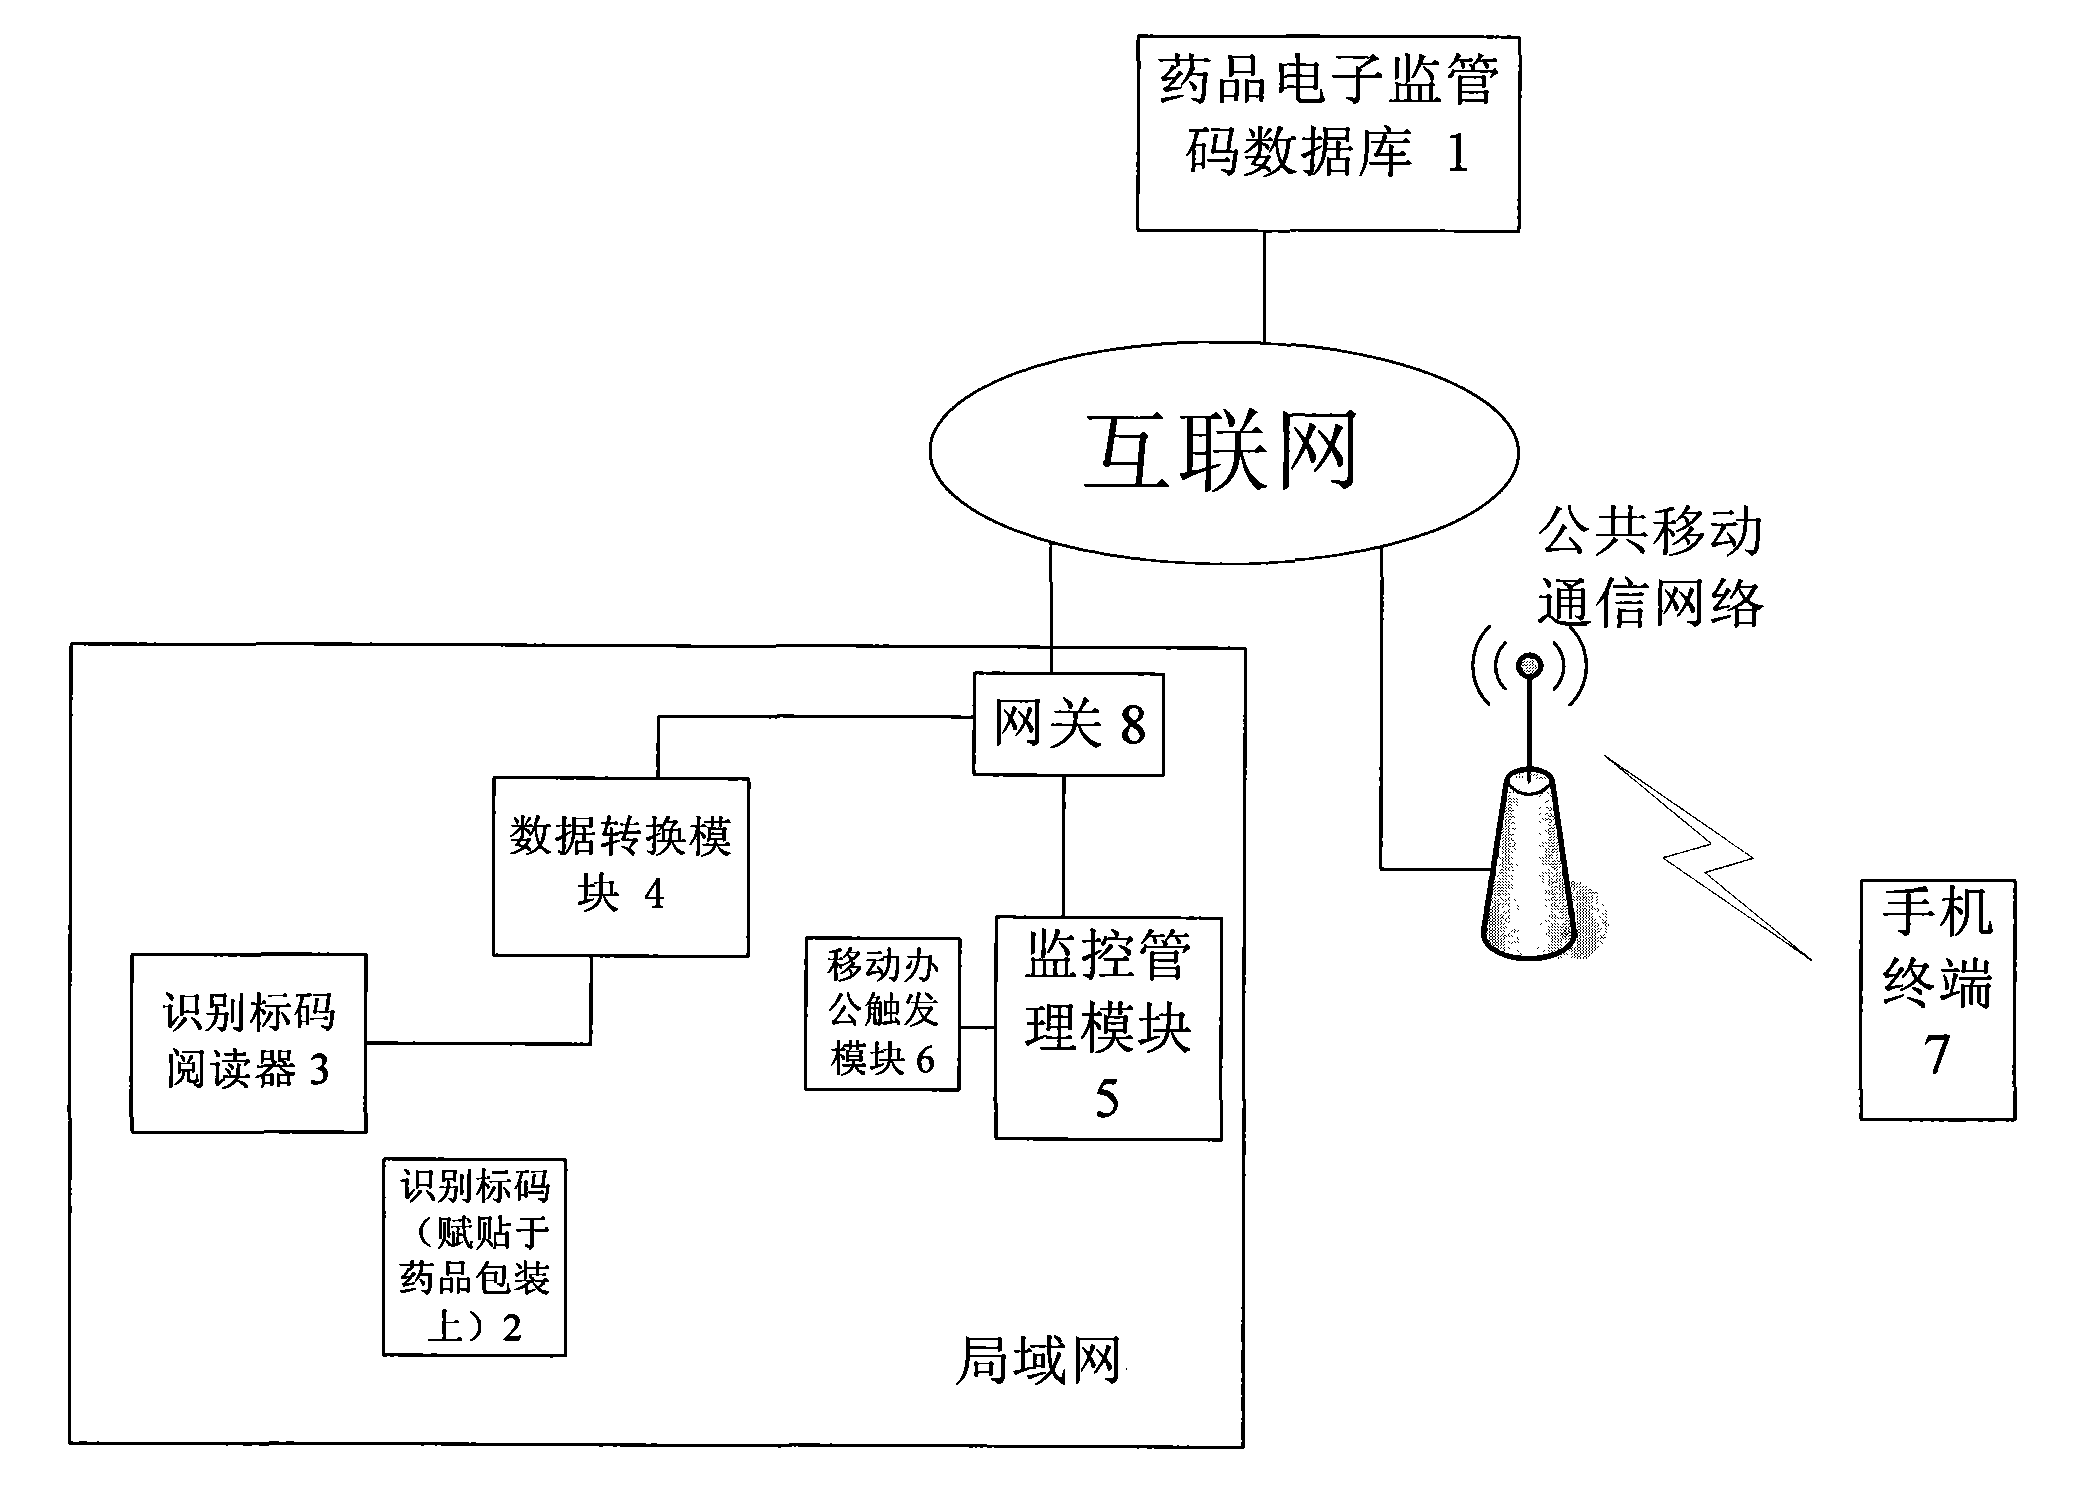 Medical logistic information processing system and method